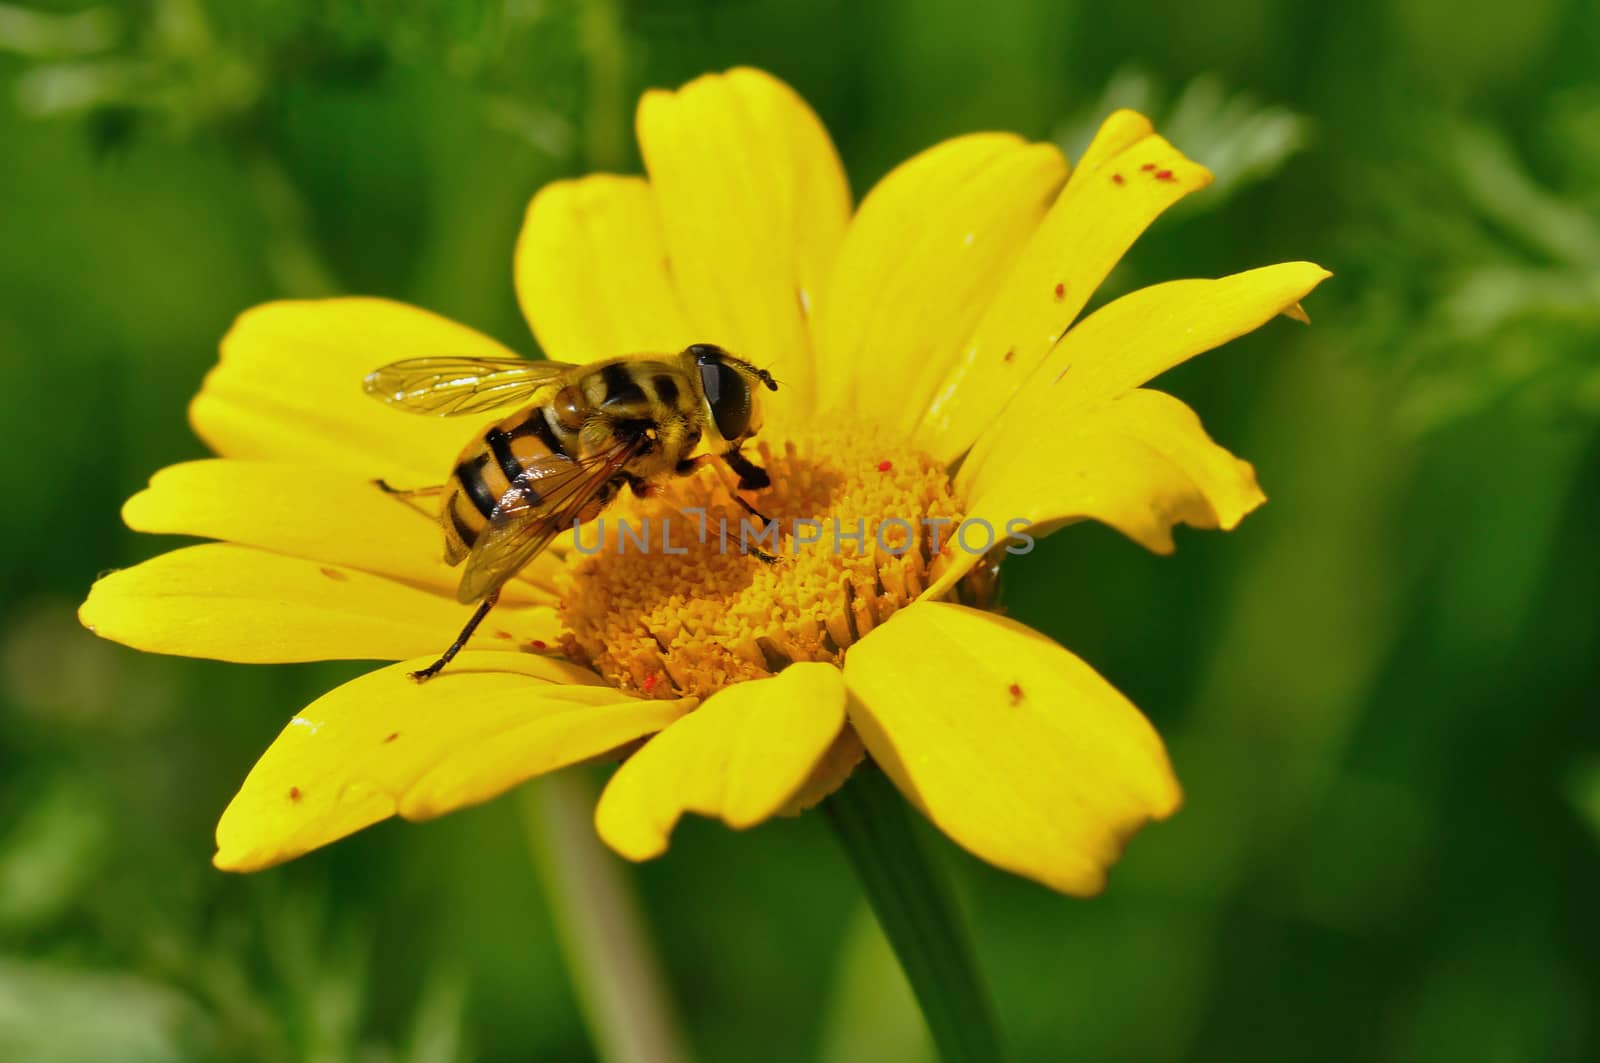 Honey bee and tiny red bugs on yellow flower. Spring season.